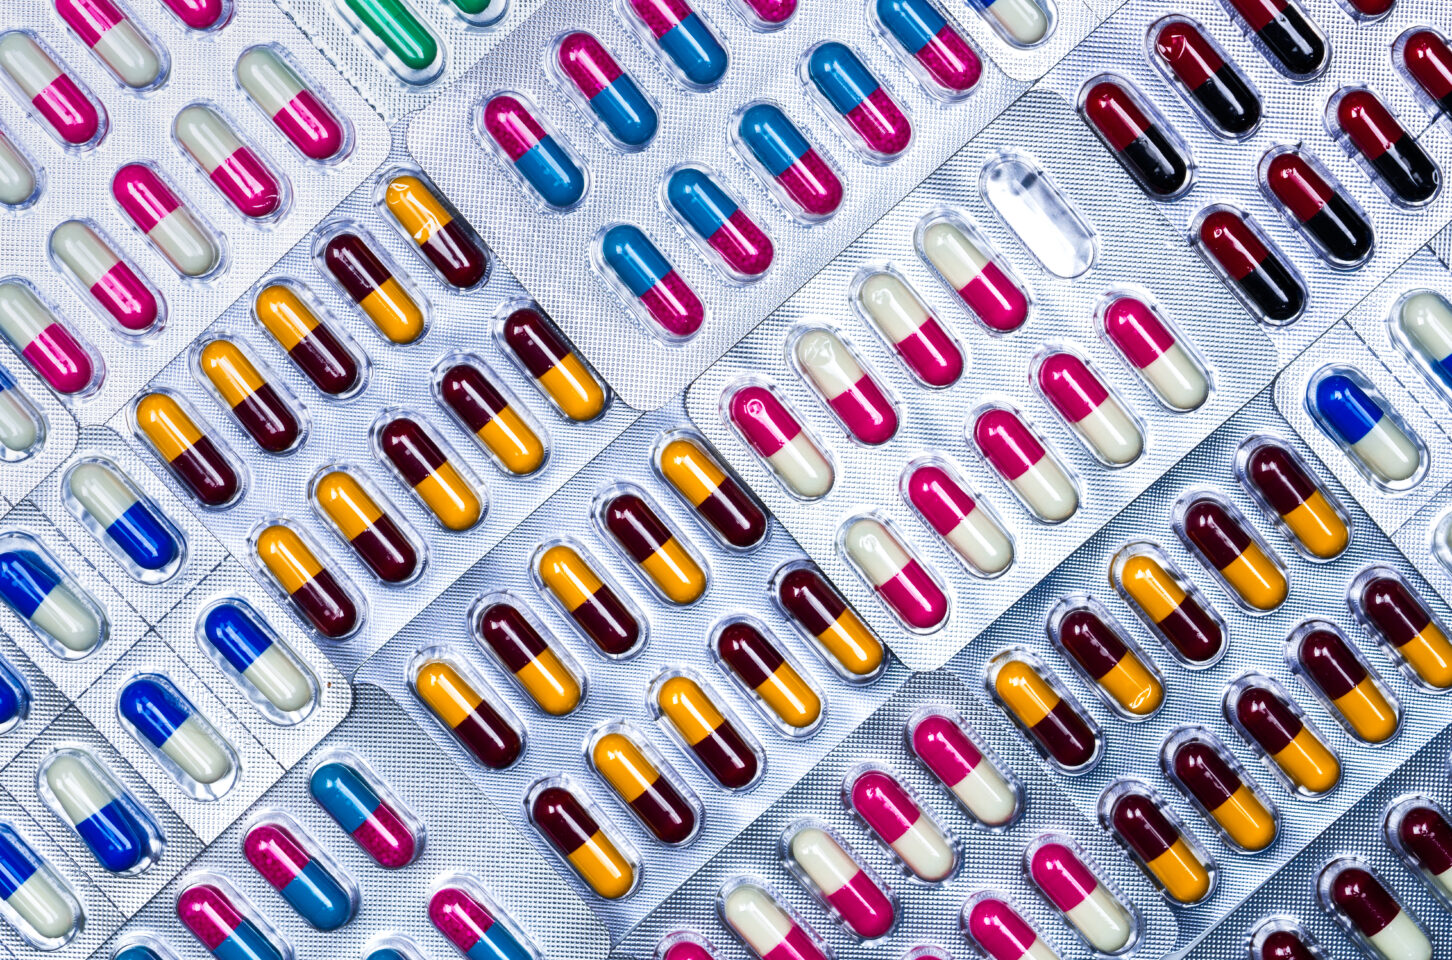 Big Pharma Drug Makers Fined Over $82B in Violations Last Decade, Report Shows